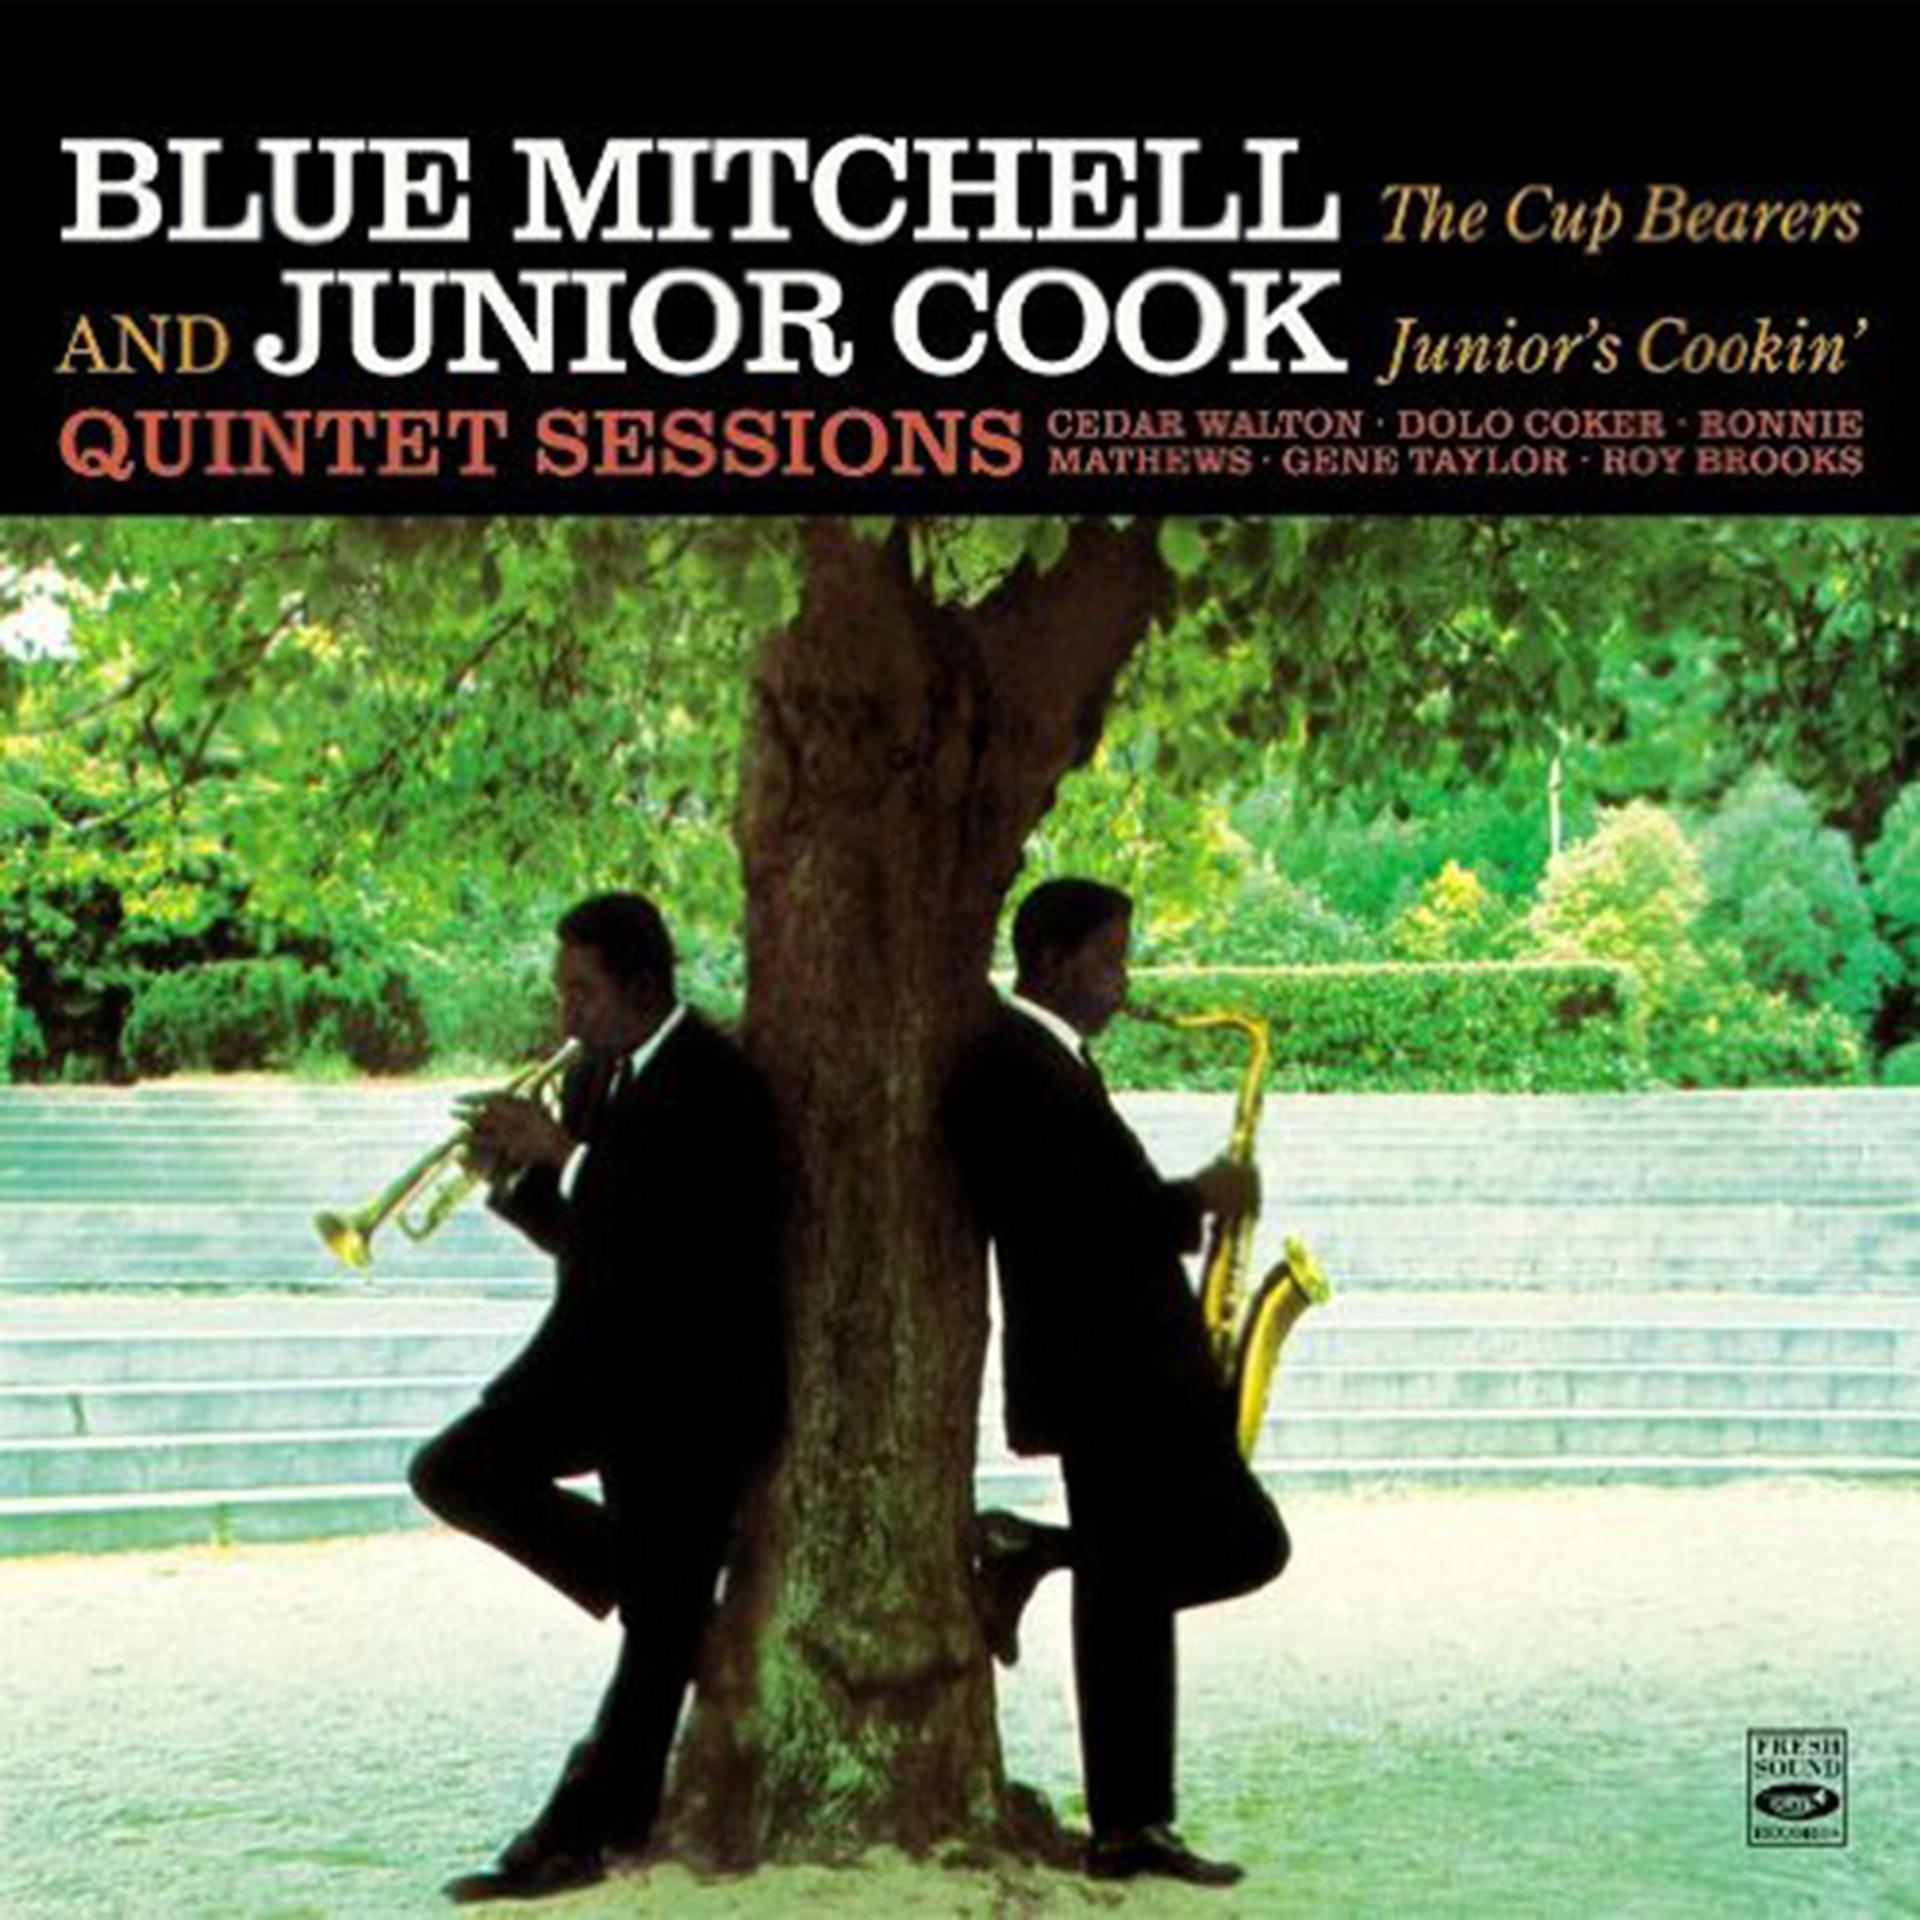 Постер альбома Blue Mitchell & Junior Cook Quintet Sessions "The Cup Bearers" / "Junior's Cookin'"